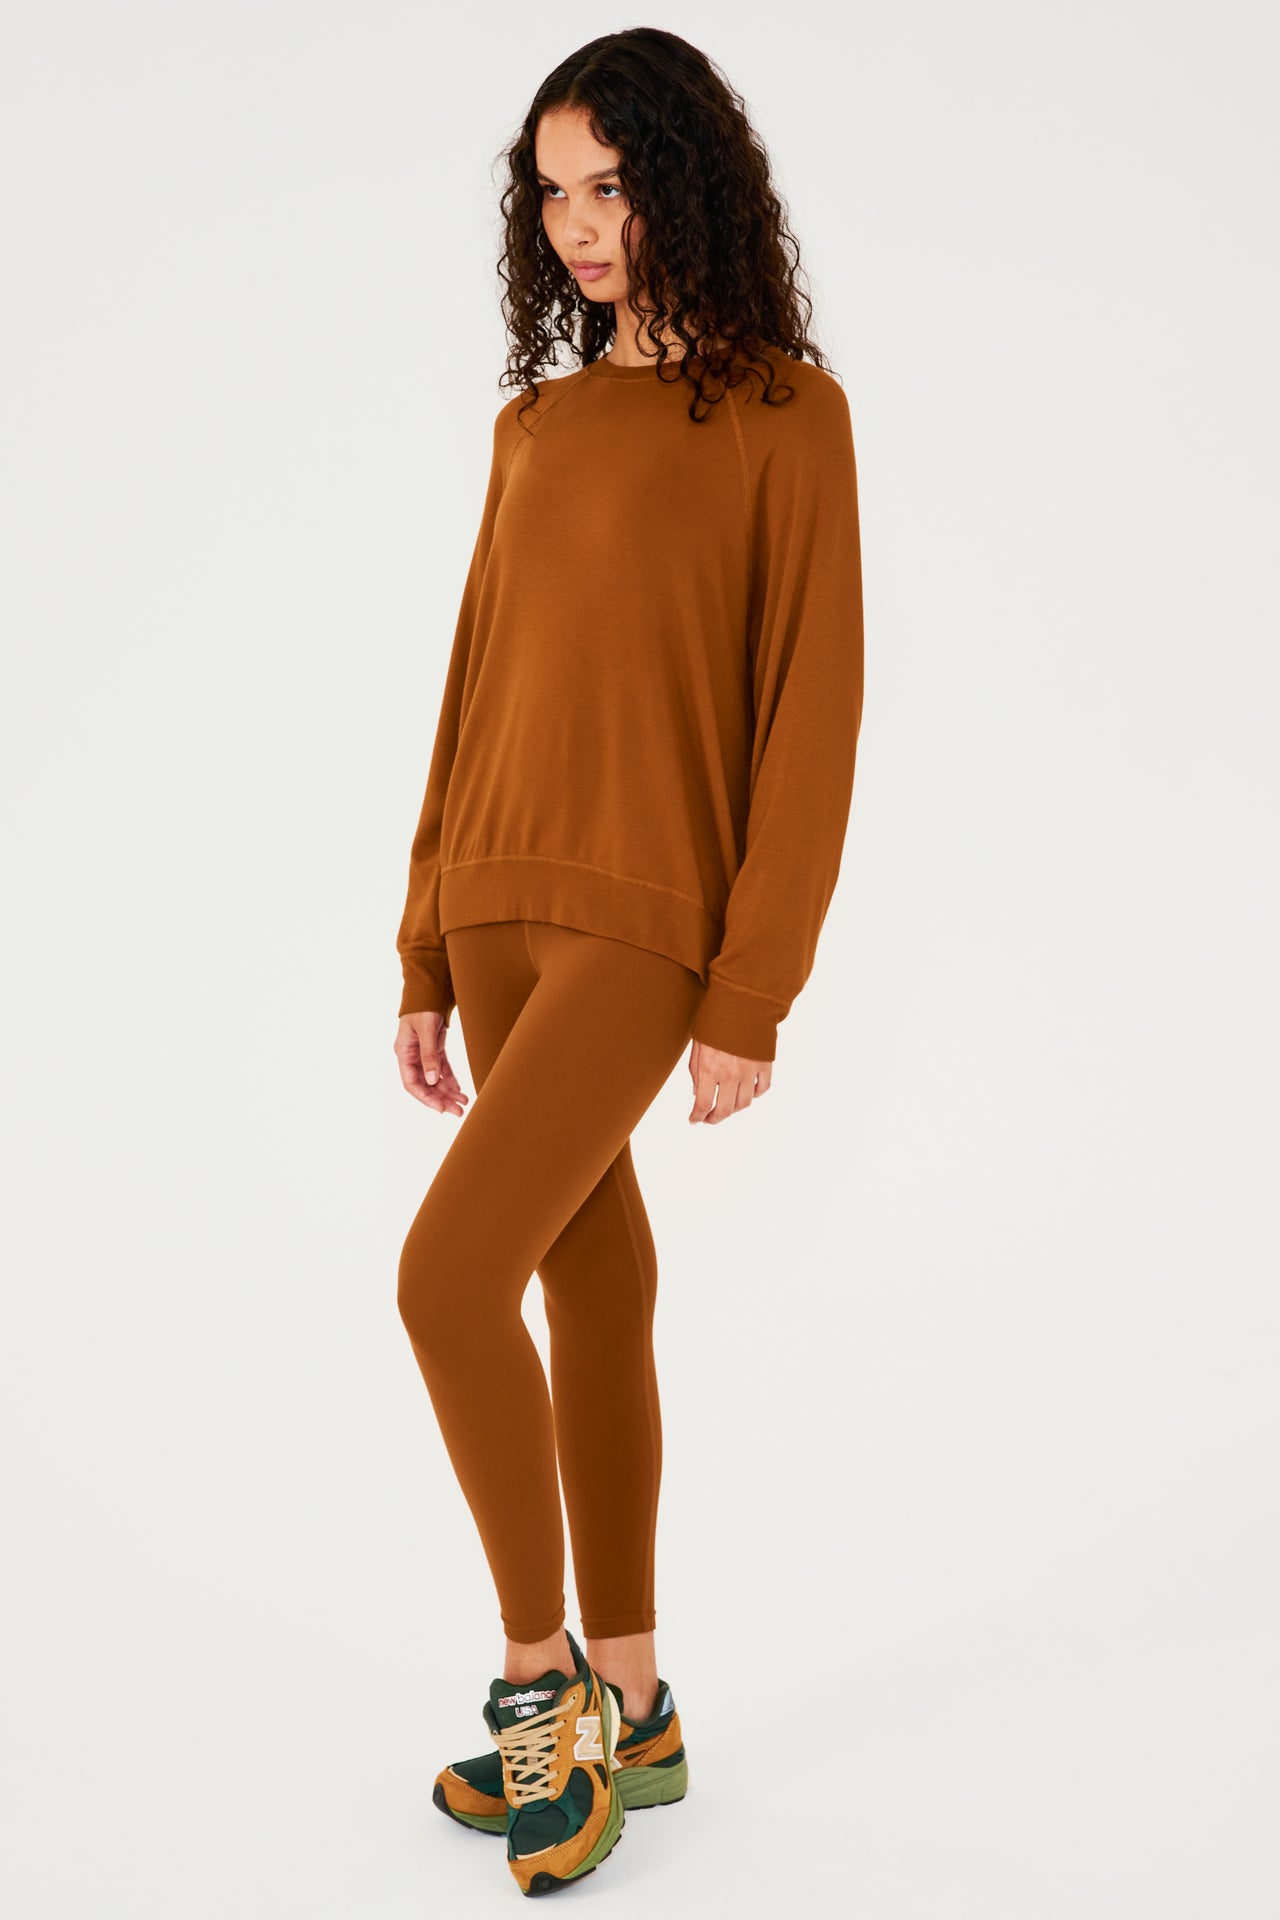 Full front view of girl wearing redish brown sweatshirt with visible stitching and ribbed hem and multi colored shoes